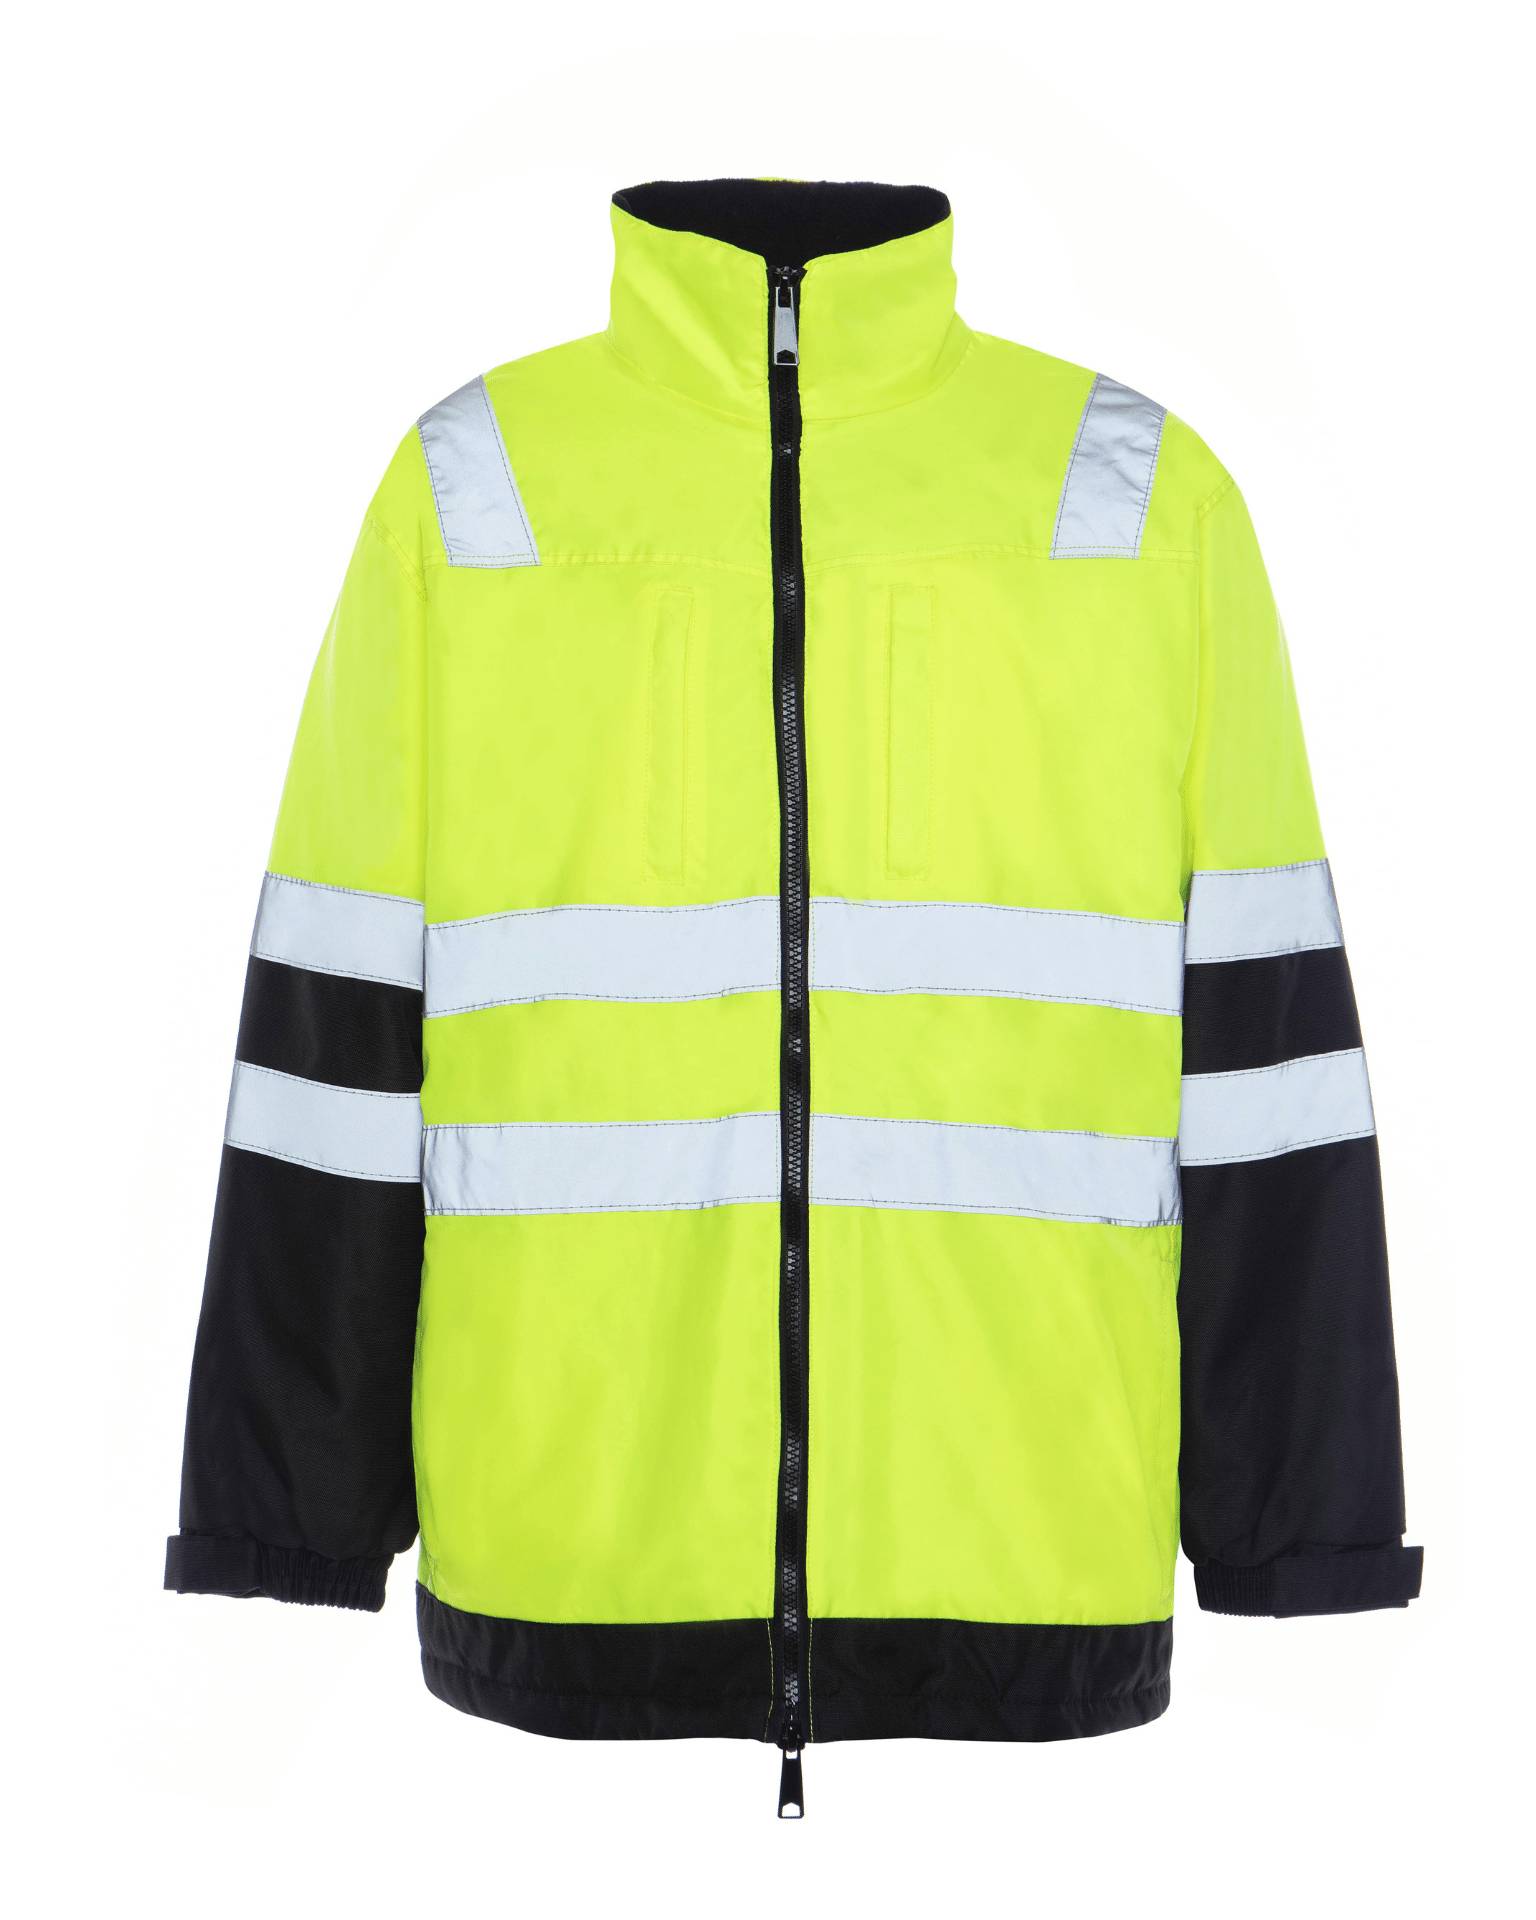 Utility Pro Wear Jacket Yellow / M UHV821 HiVis Arctic 3-in-1 Jacket